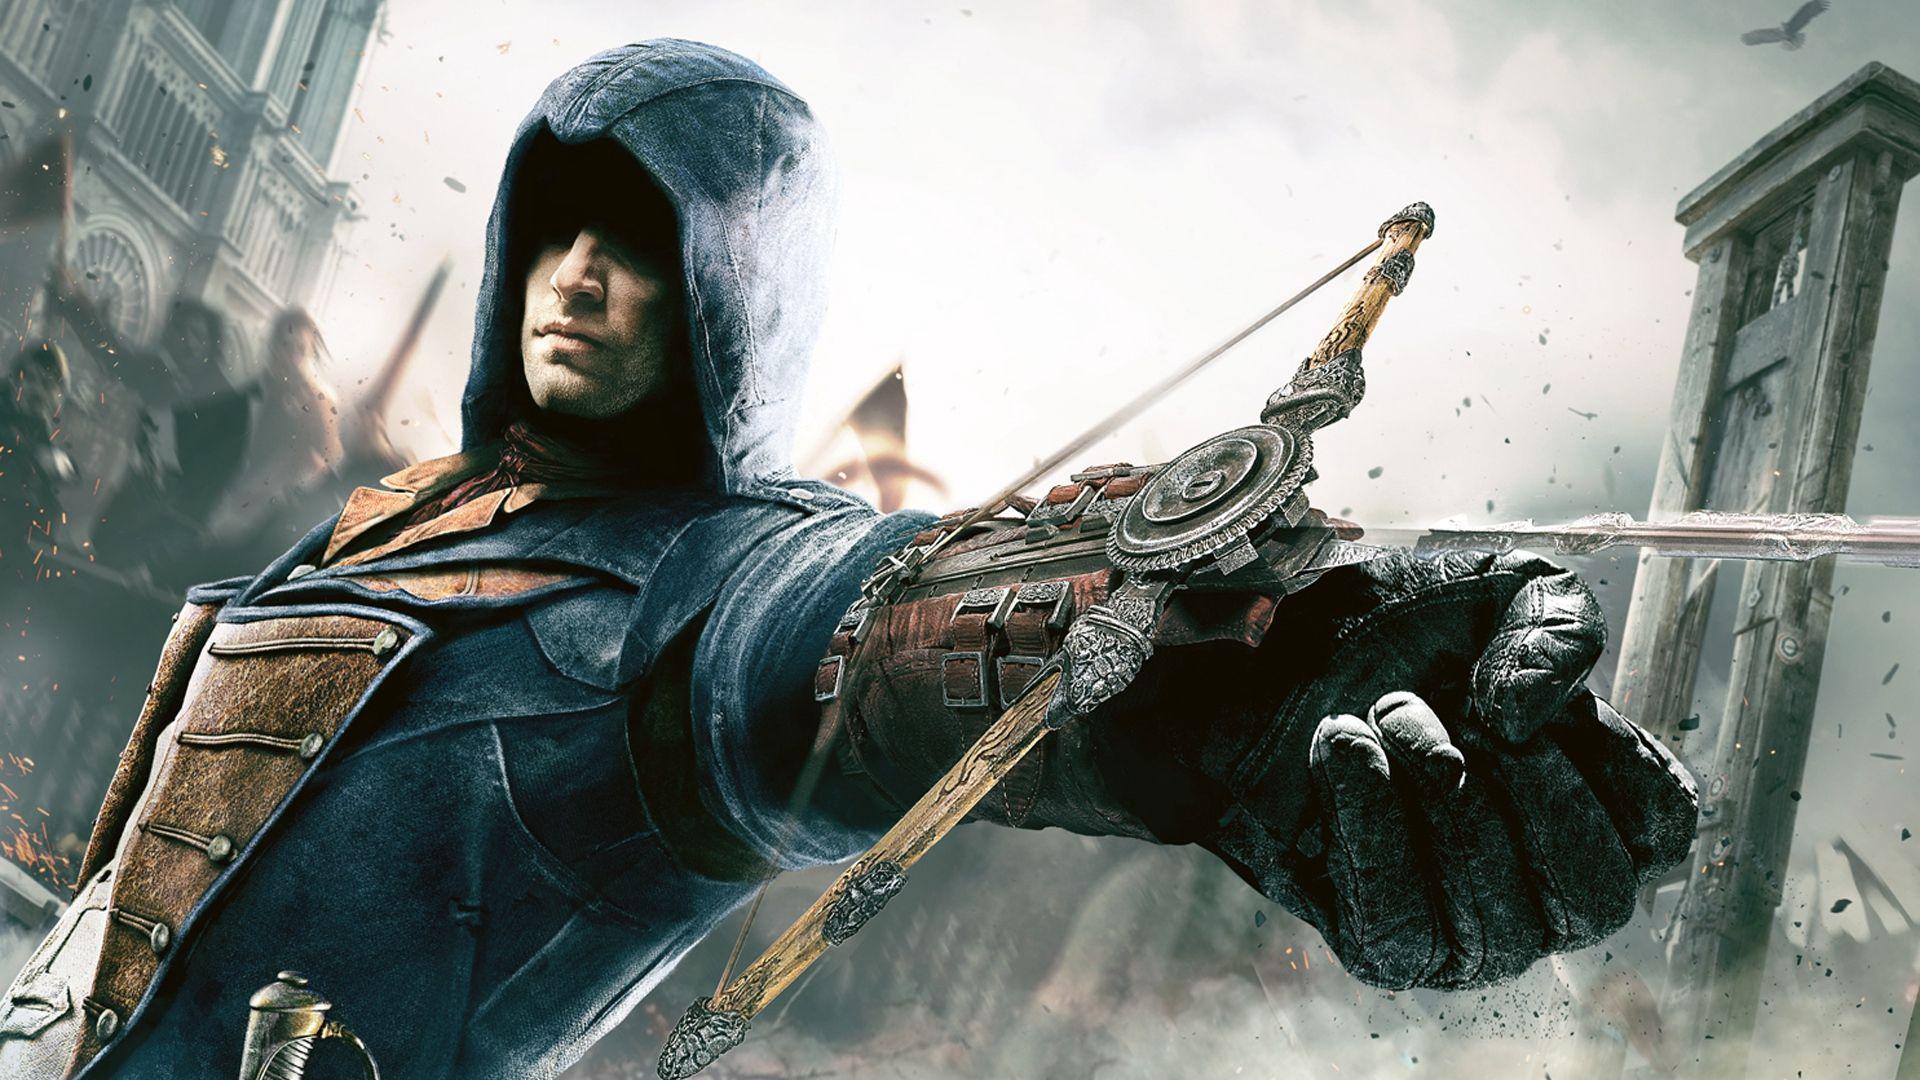 Download wallpaper 1920x1080 unity, arno, crossbow HD background